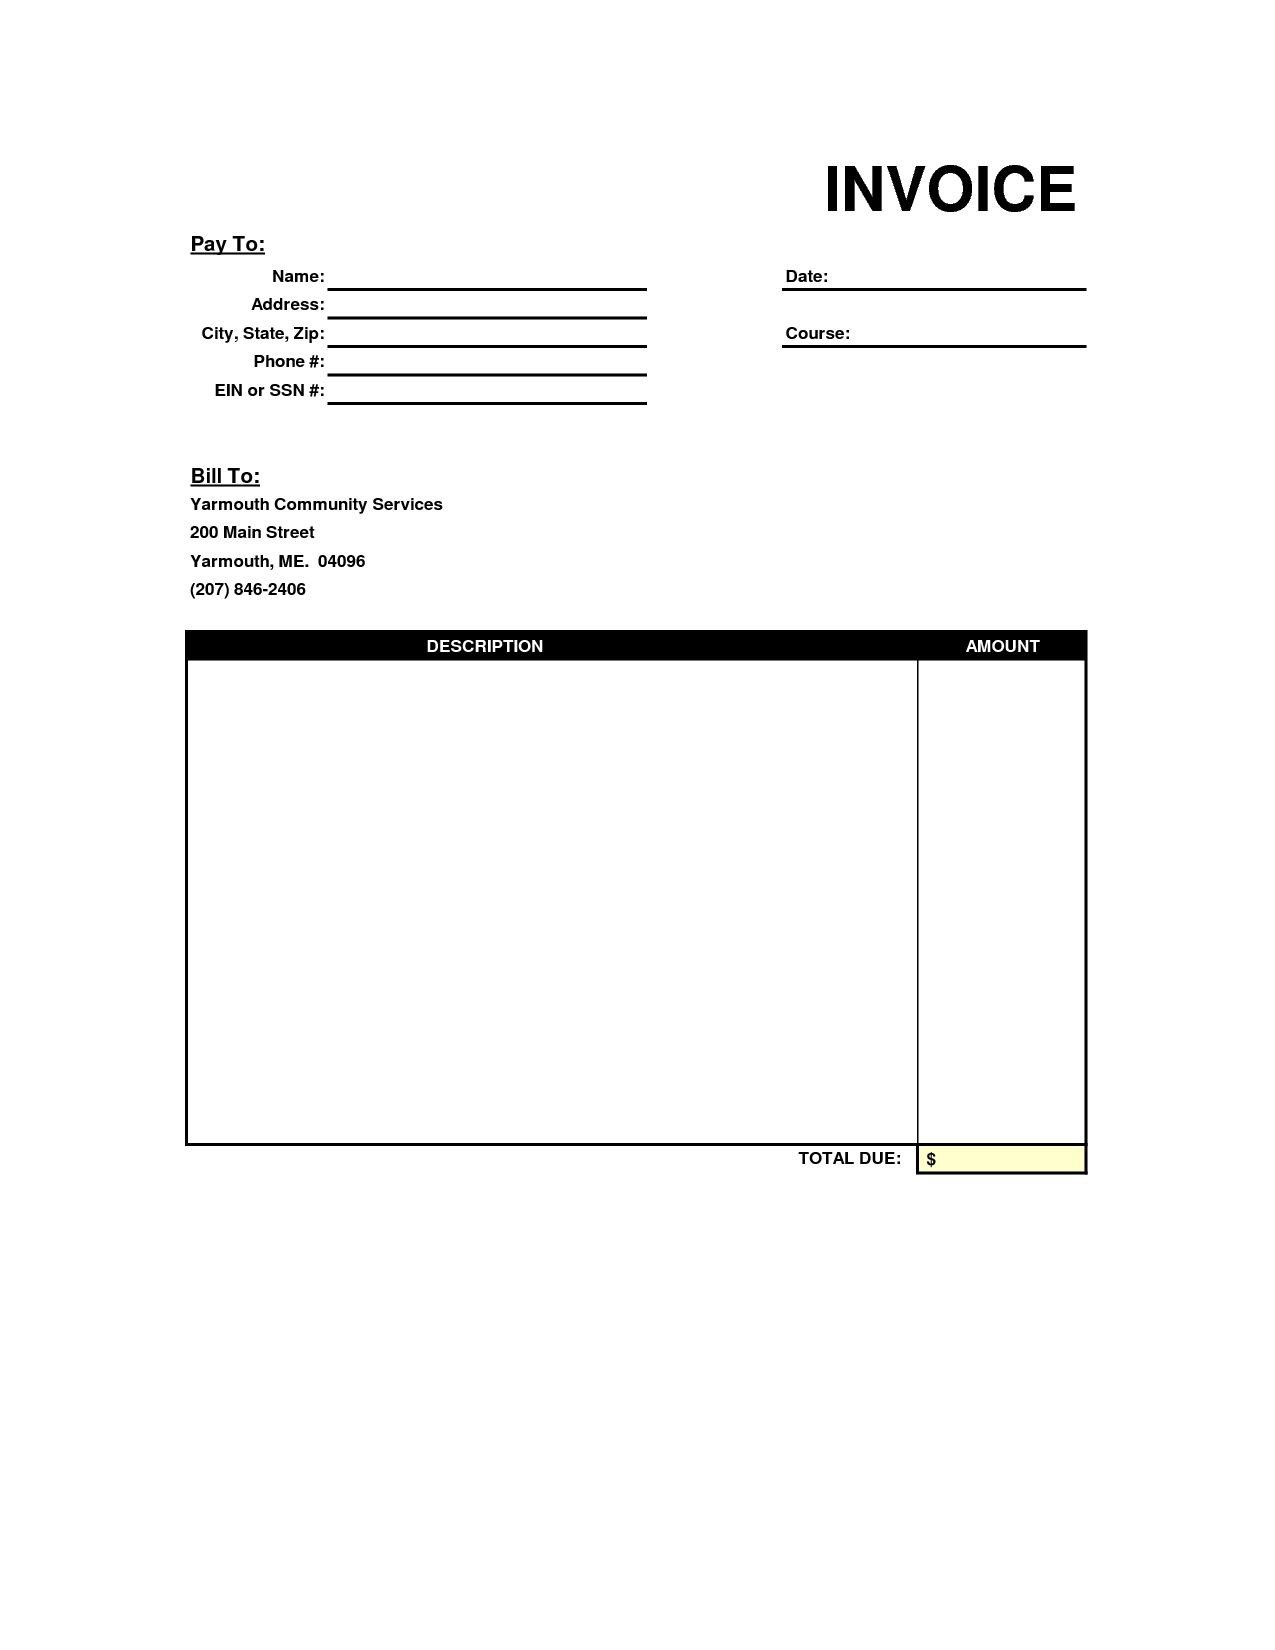 blank copy of an invoice google recruiter resume copy of